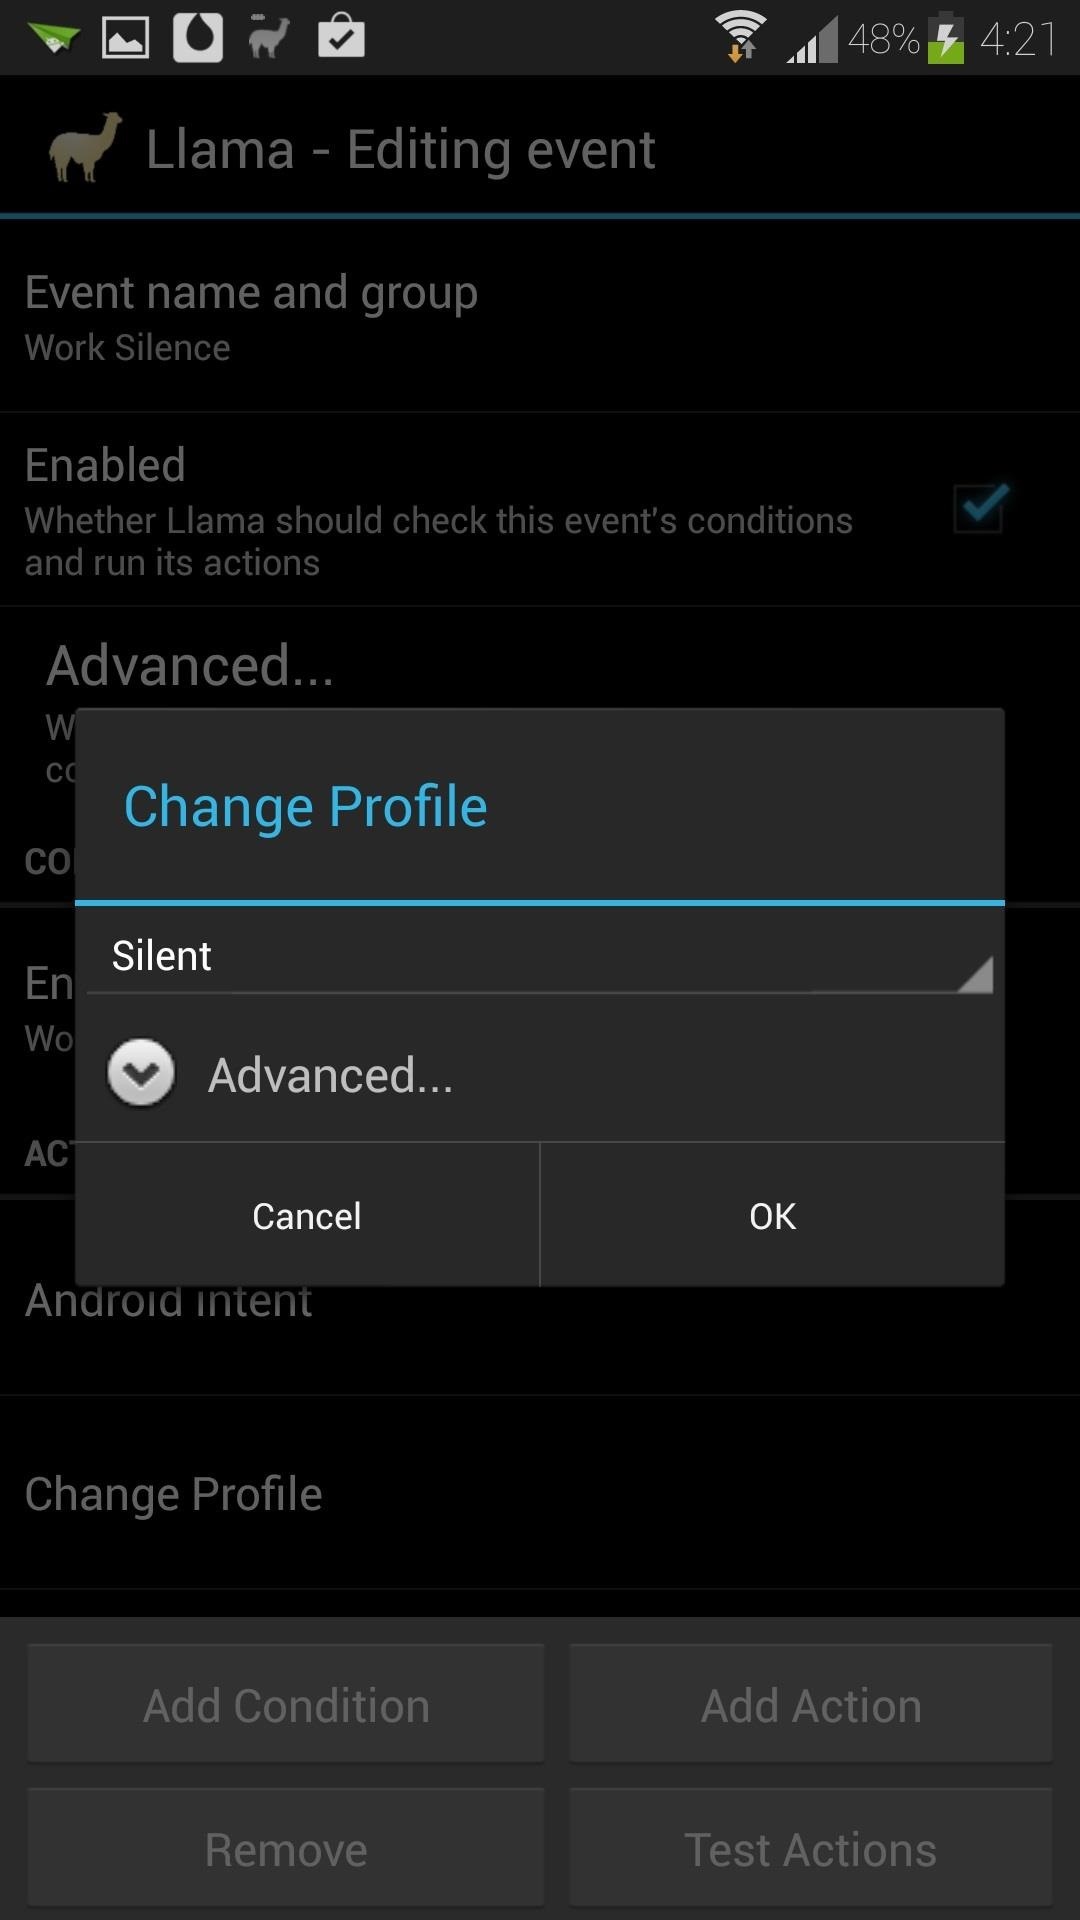 How to Automate Battery-Saving Mode, Screen Rotation, & Other Custom Tasks on Your Samsung Galaxy S4